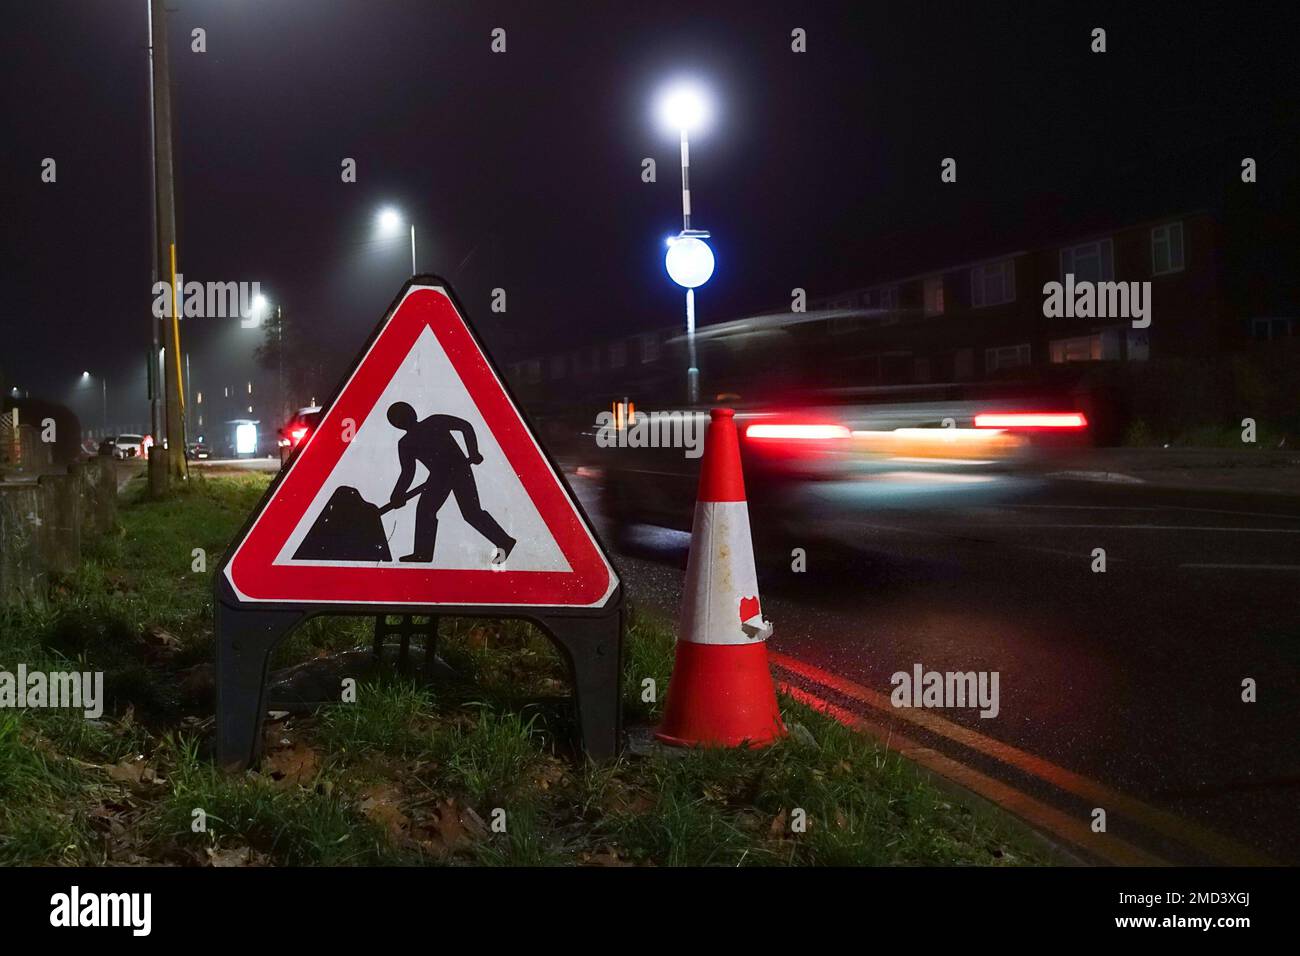 A triangular roadworks sign and traffic cone at the side of a road at night to worn motorists of roadworks ahead, Stock Photo